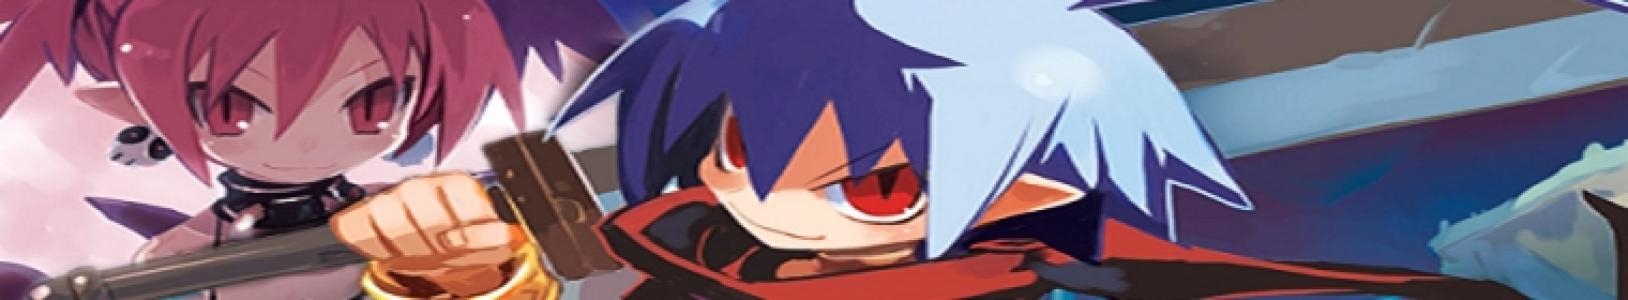 Disgaea: Hour of Darkness banner